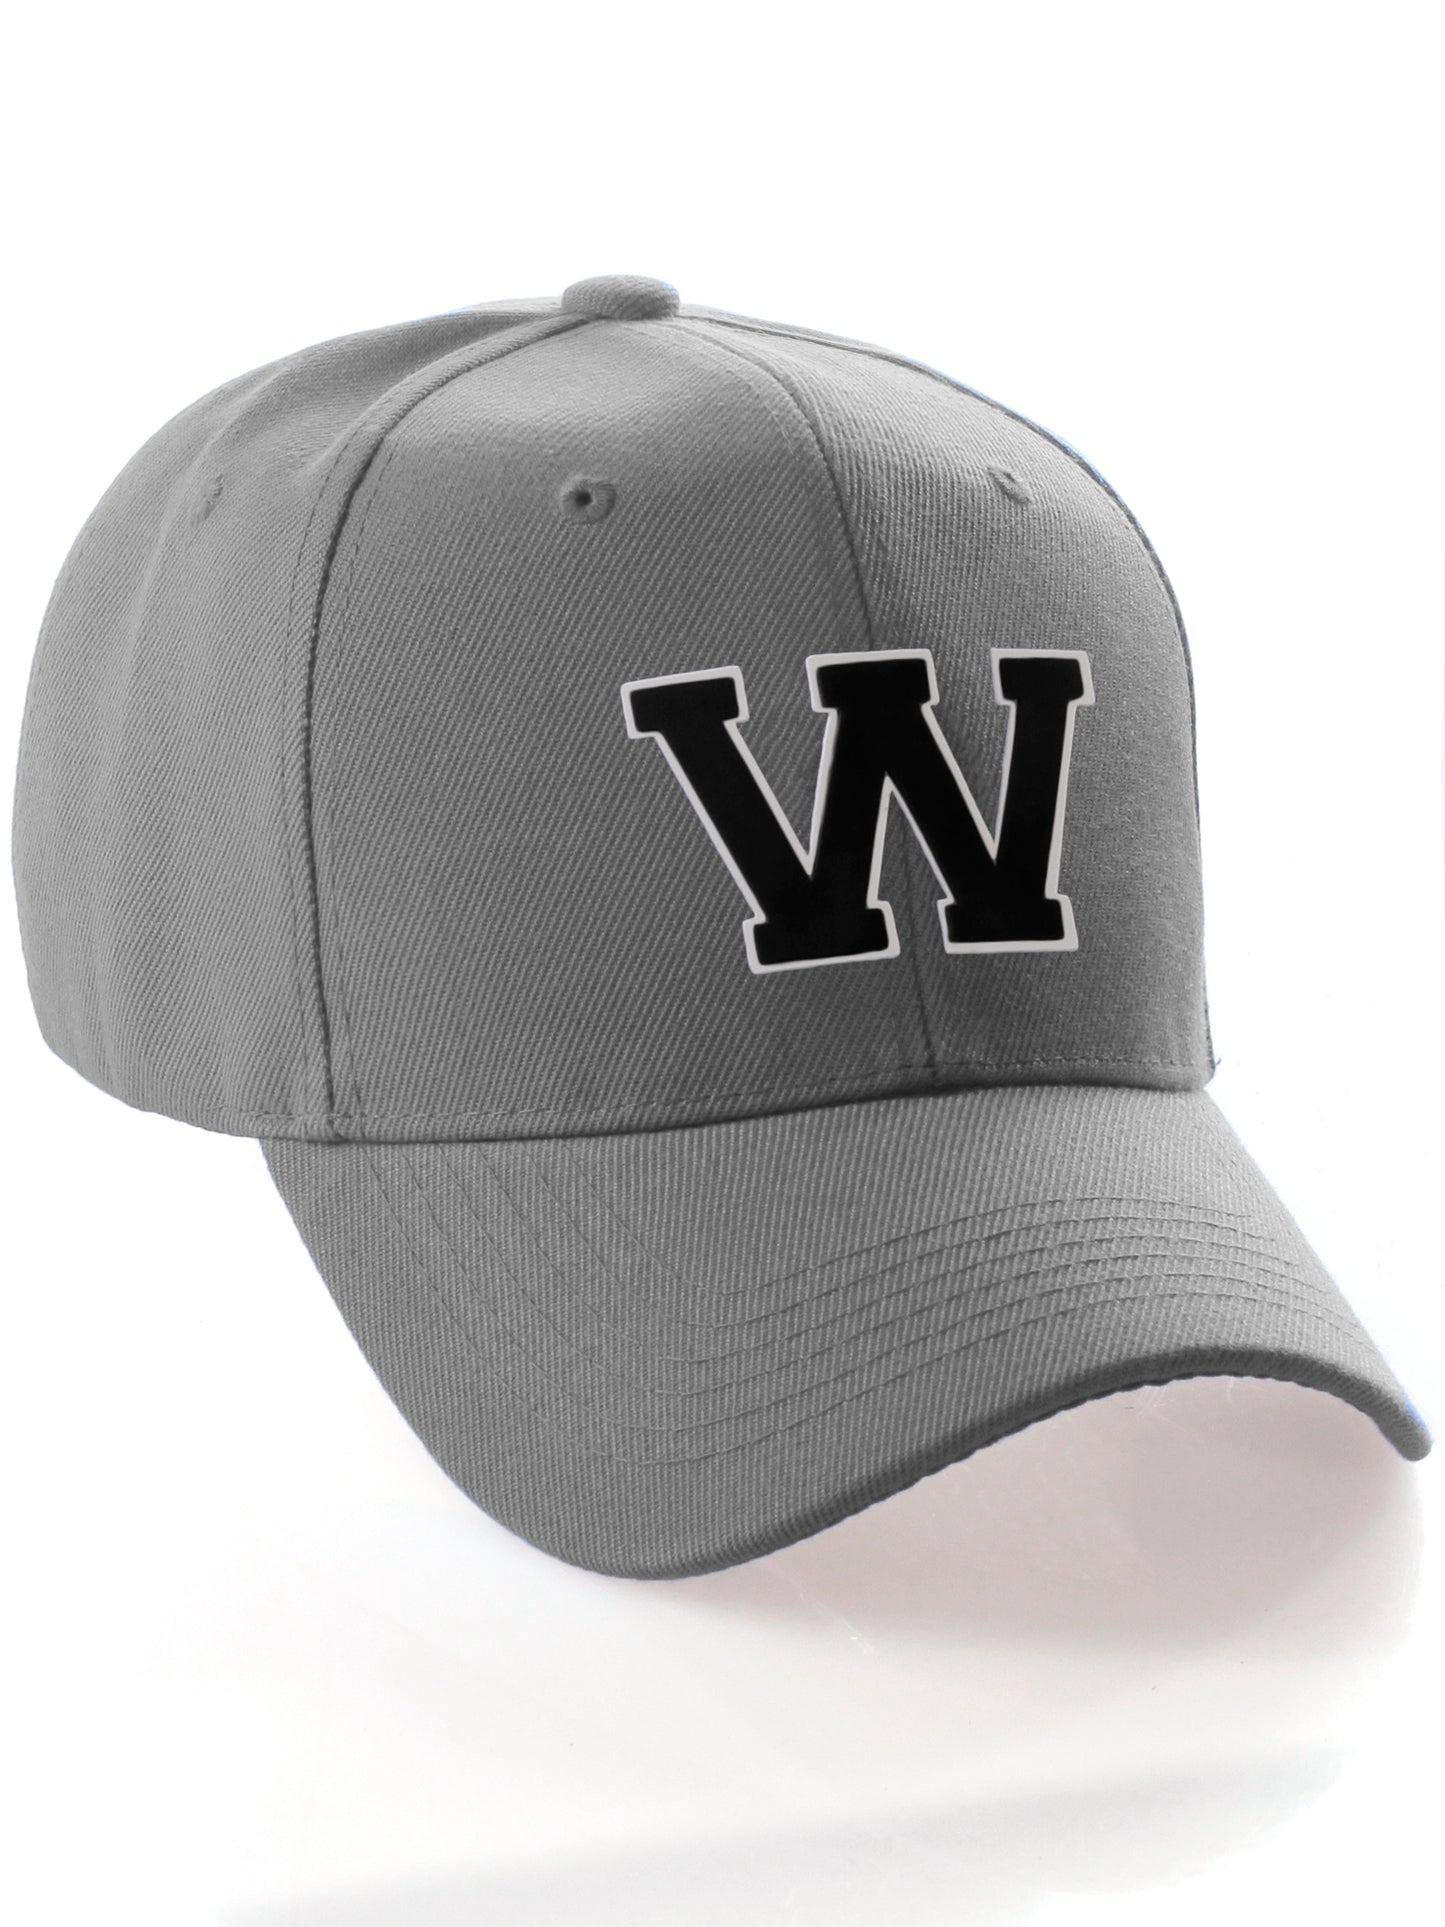 Classic Baseball Hat Custom A to Z Initial Team Letter, Charcoal Cap White Black